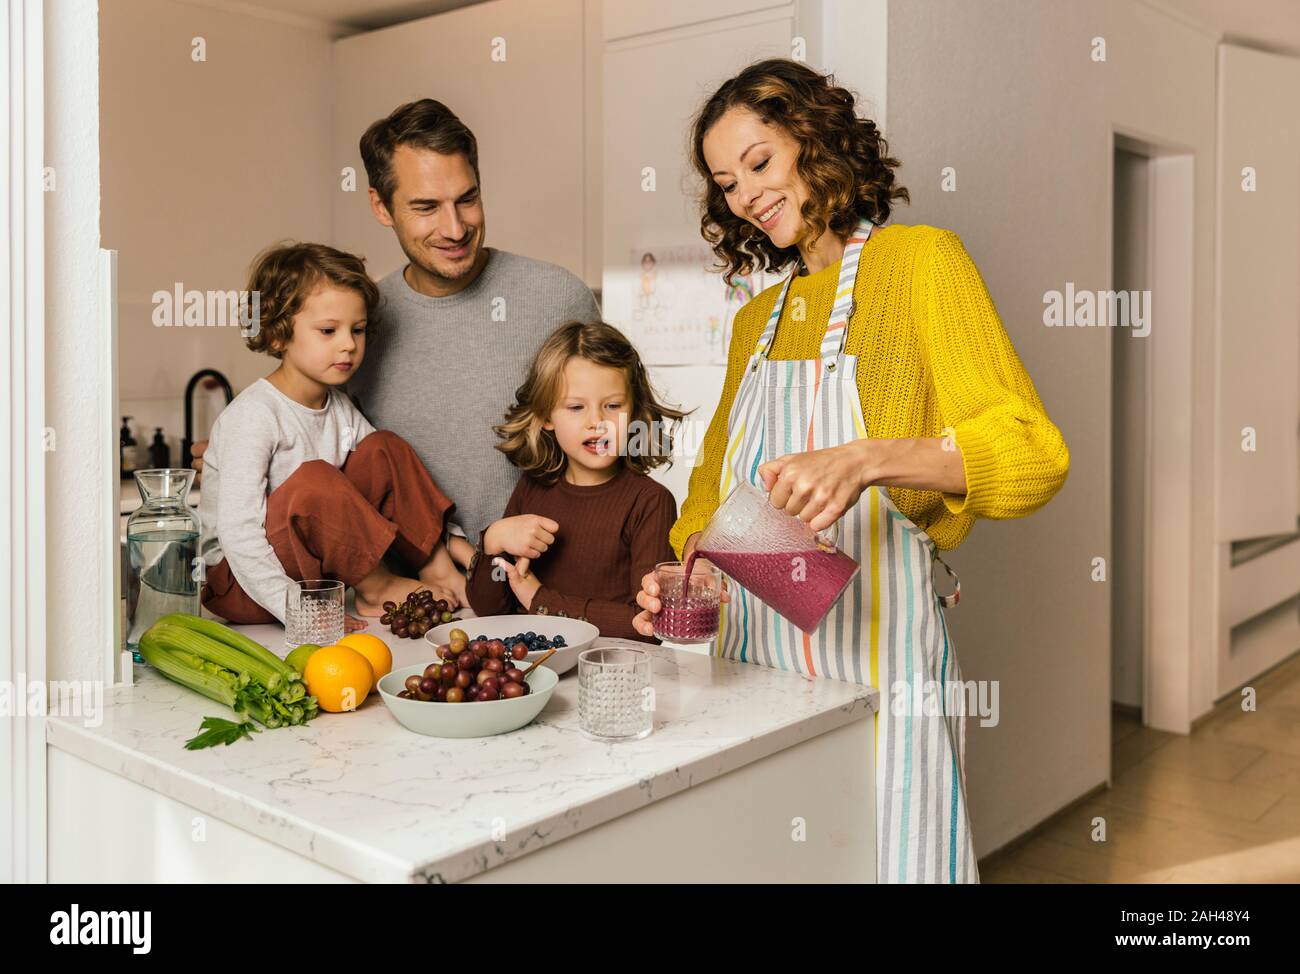 Mother preparing a smoothie for her family in kitchen Stock Photo